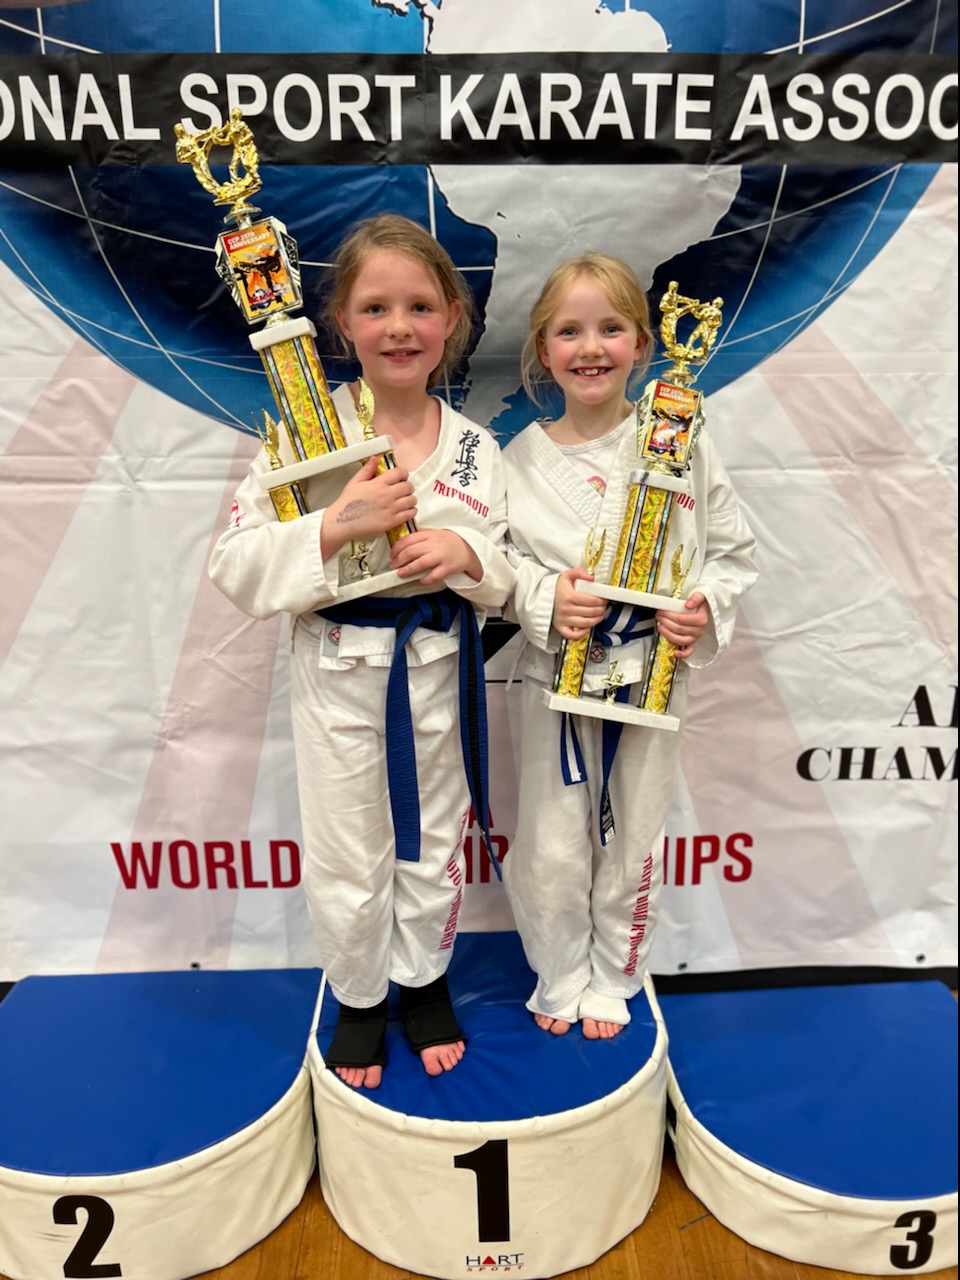 Karate lessons for children in Wollondilly